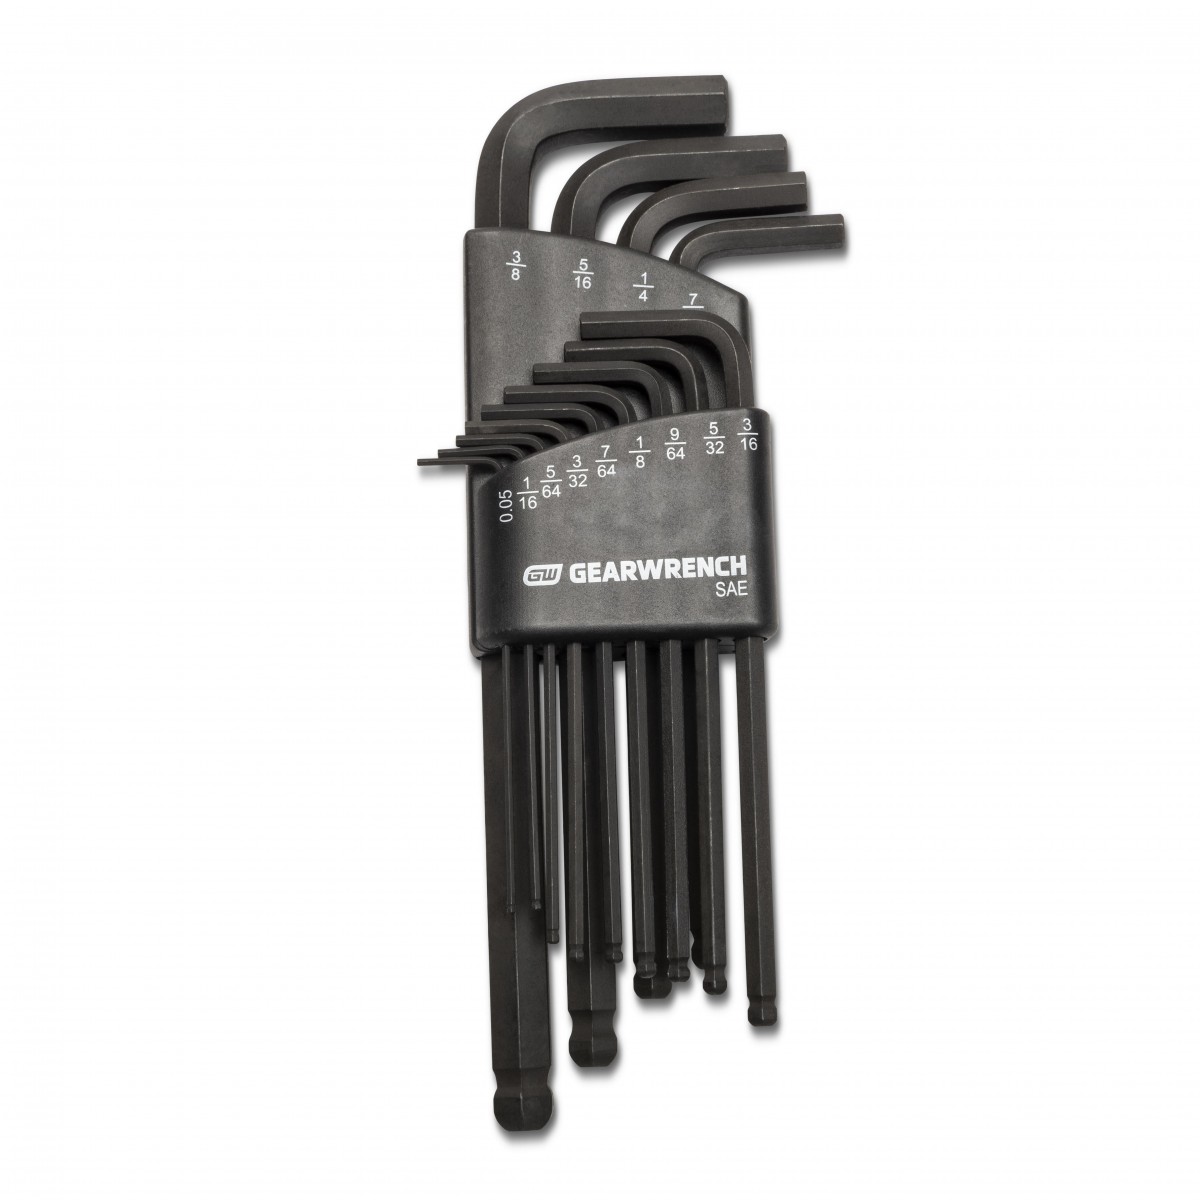 Picture of GearWrench KDT-83524 Long Ball End SAE Hex Key Set - 13 Piece